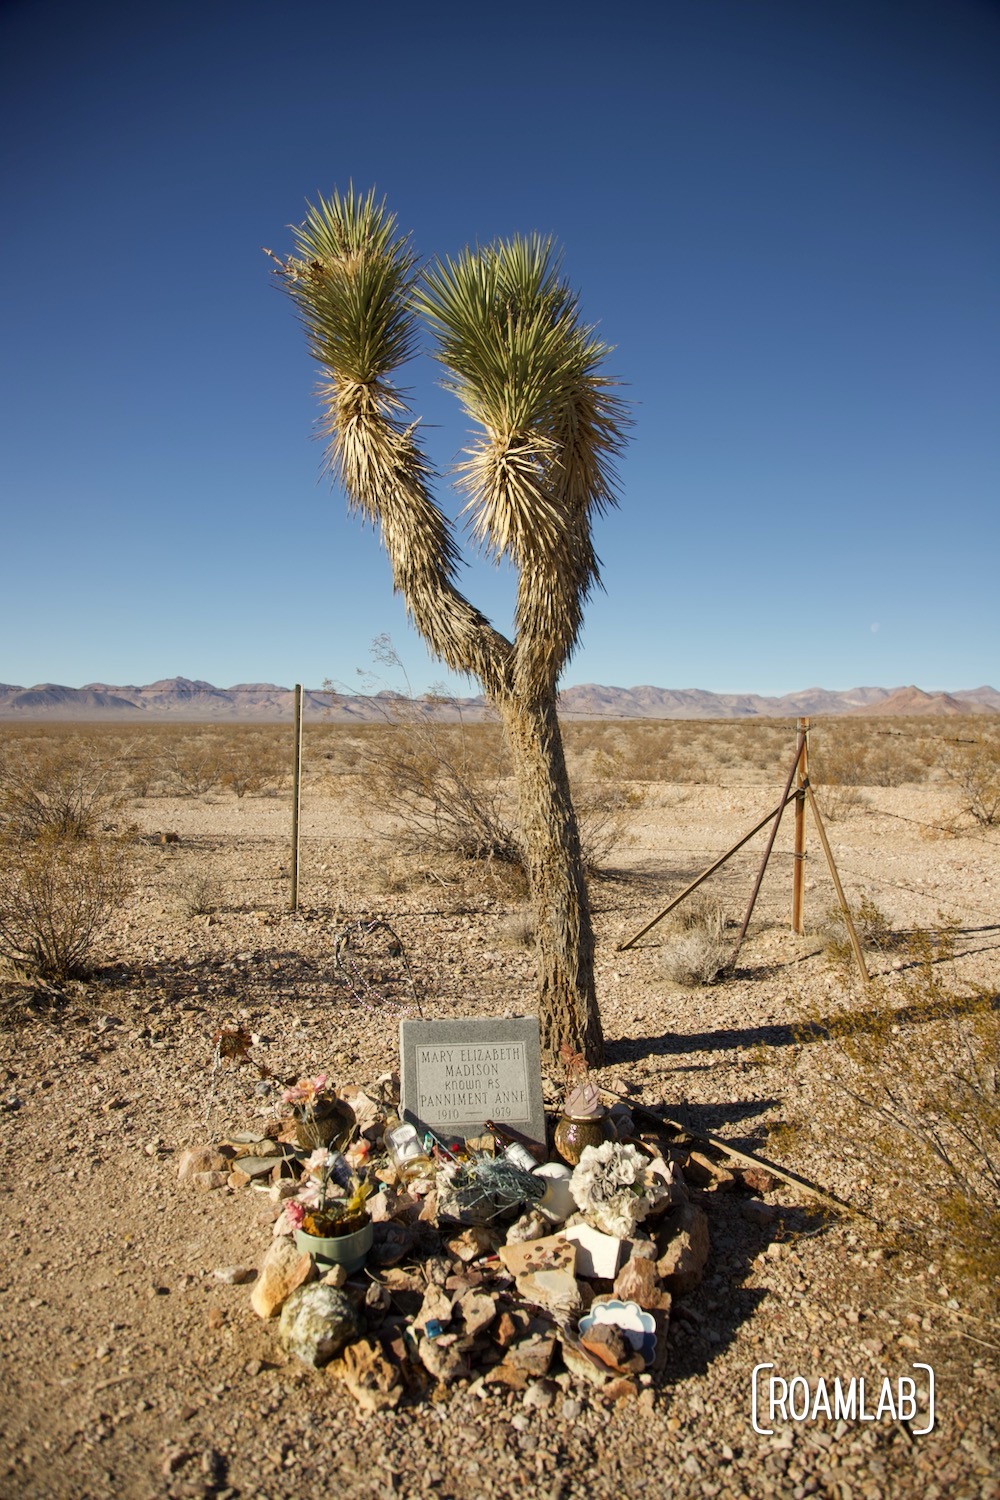 Decorated grave of Mary Elizabeth Madison "Panniment Anne" with a Joshua Tree growing next to the tree.